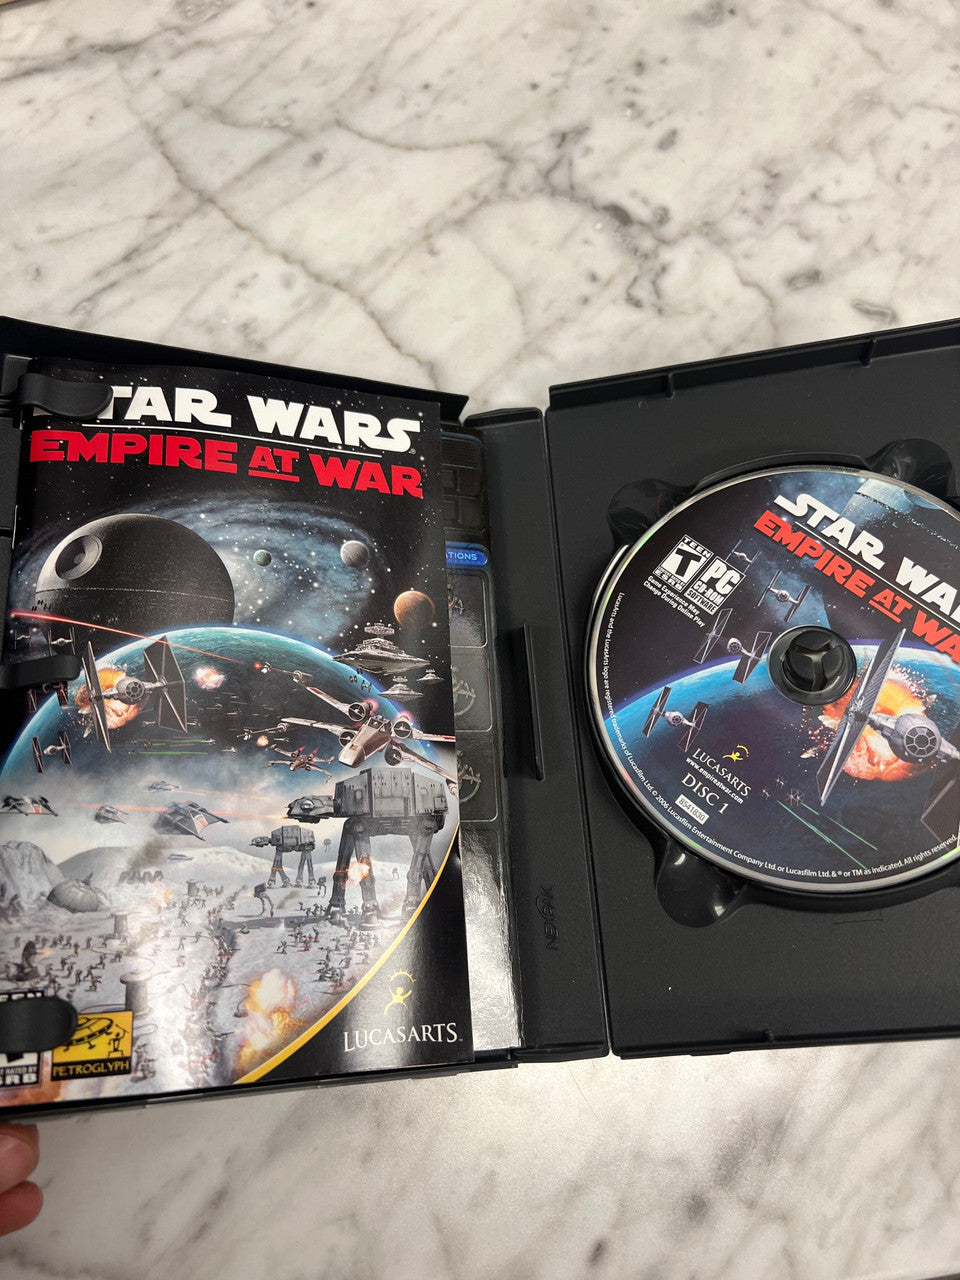 Star Wars Empire At War PC CD-ROM USA USED 2 Discs & Instructions Booklet